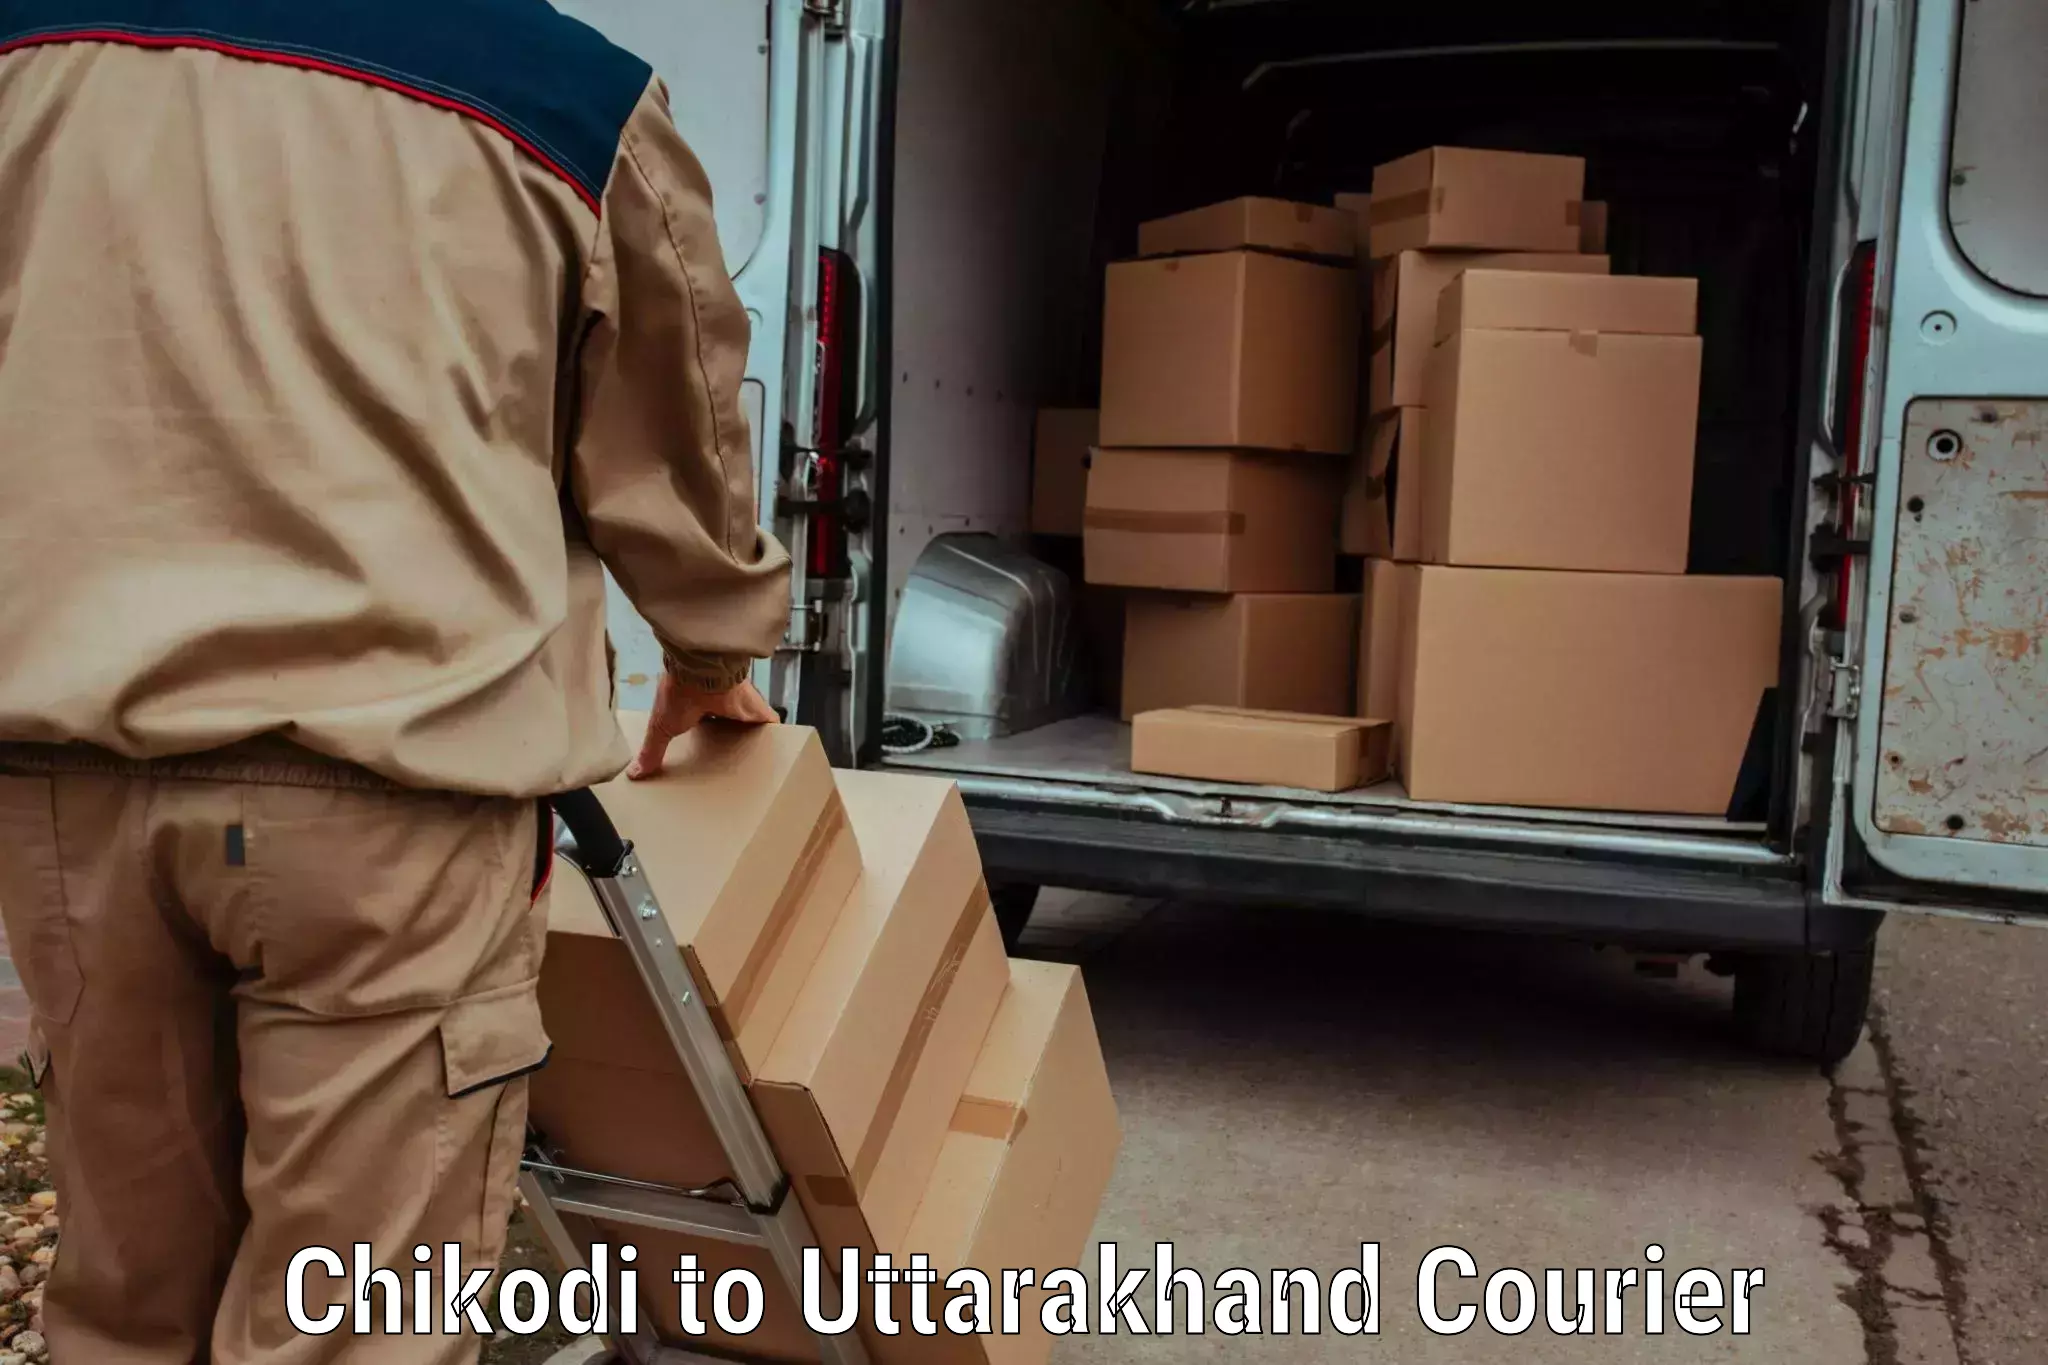 Next-day delivery options Chikodi to Tehri Garhwal